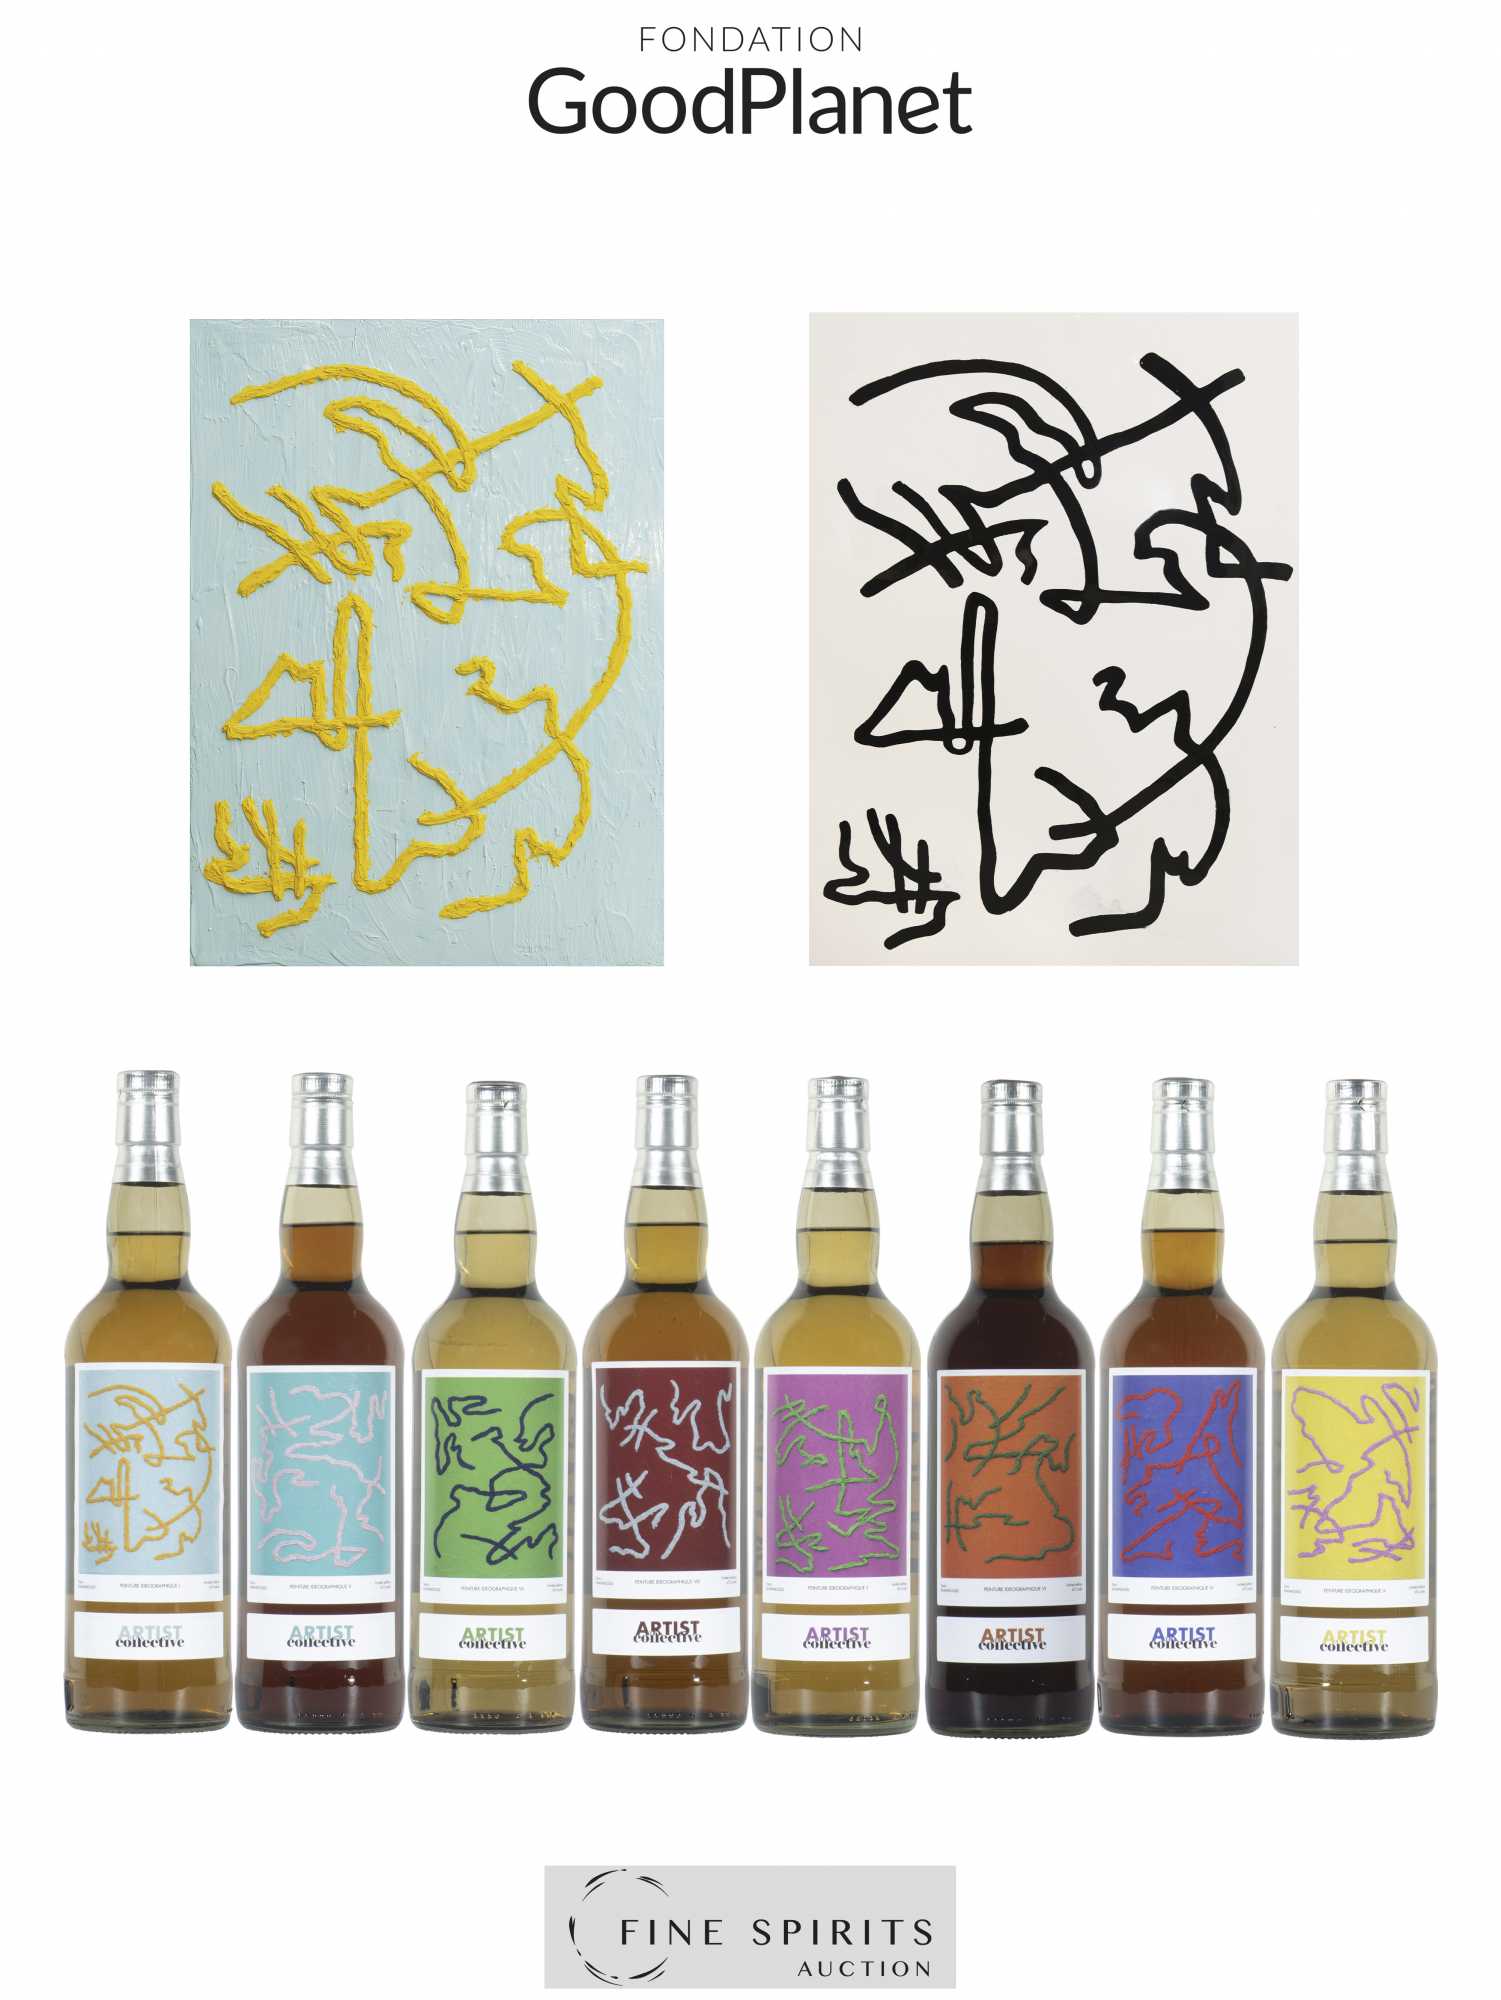 Artist Collective 6.0 - Yanis Khannoussi x LMDW (8 bottles and 1 diptyque) 